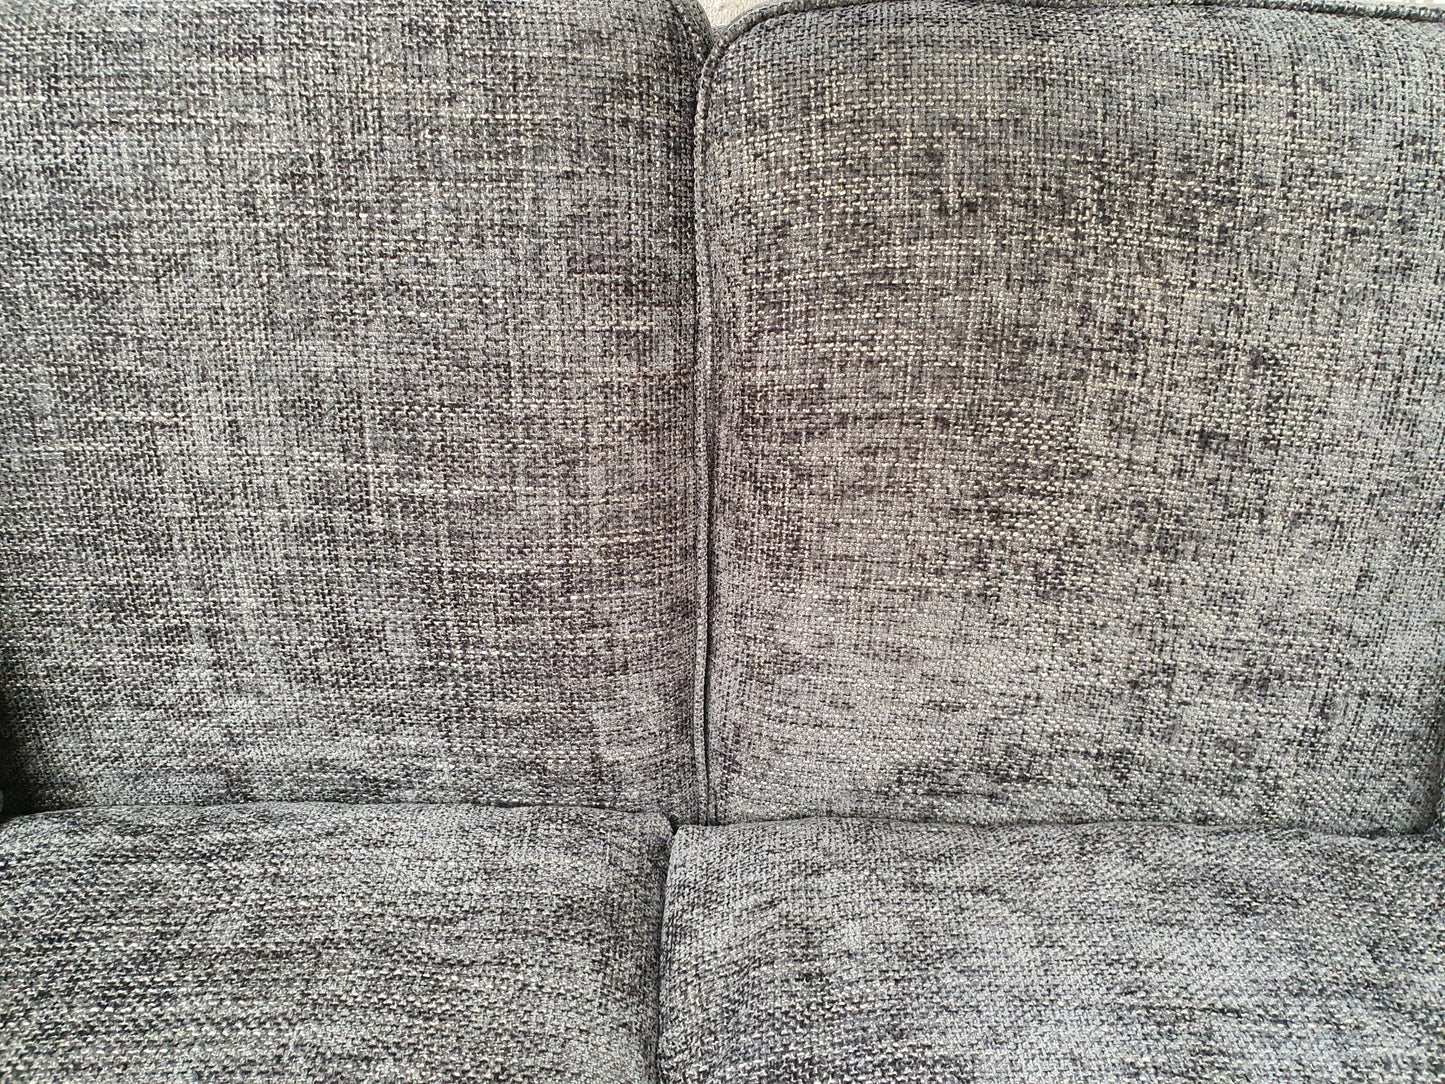 Barker & Stonehouse Borelly Fabric 2 x 2 Seater Sofas